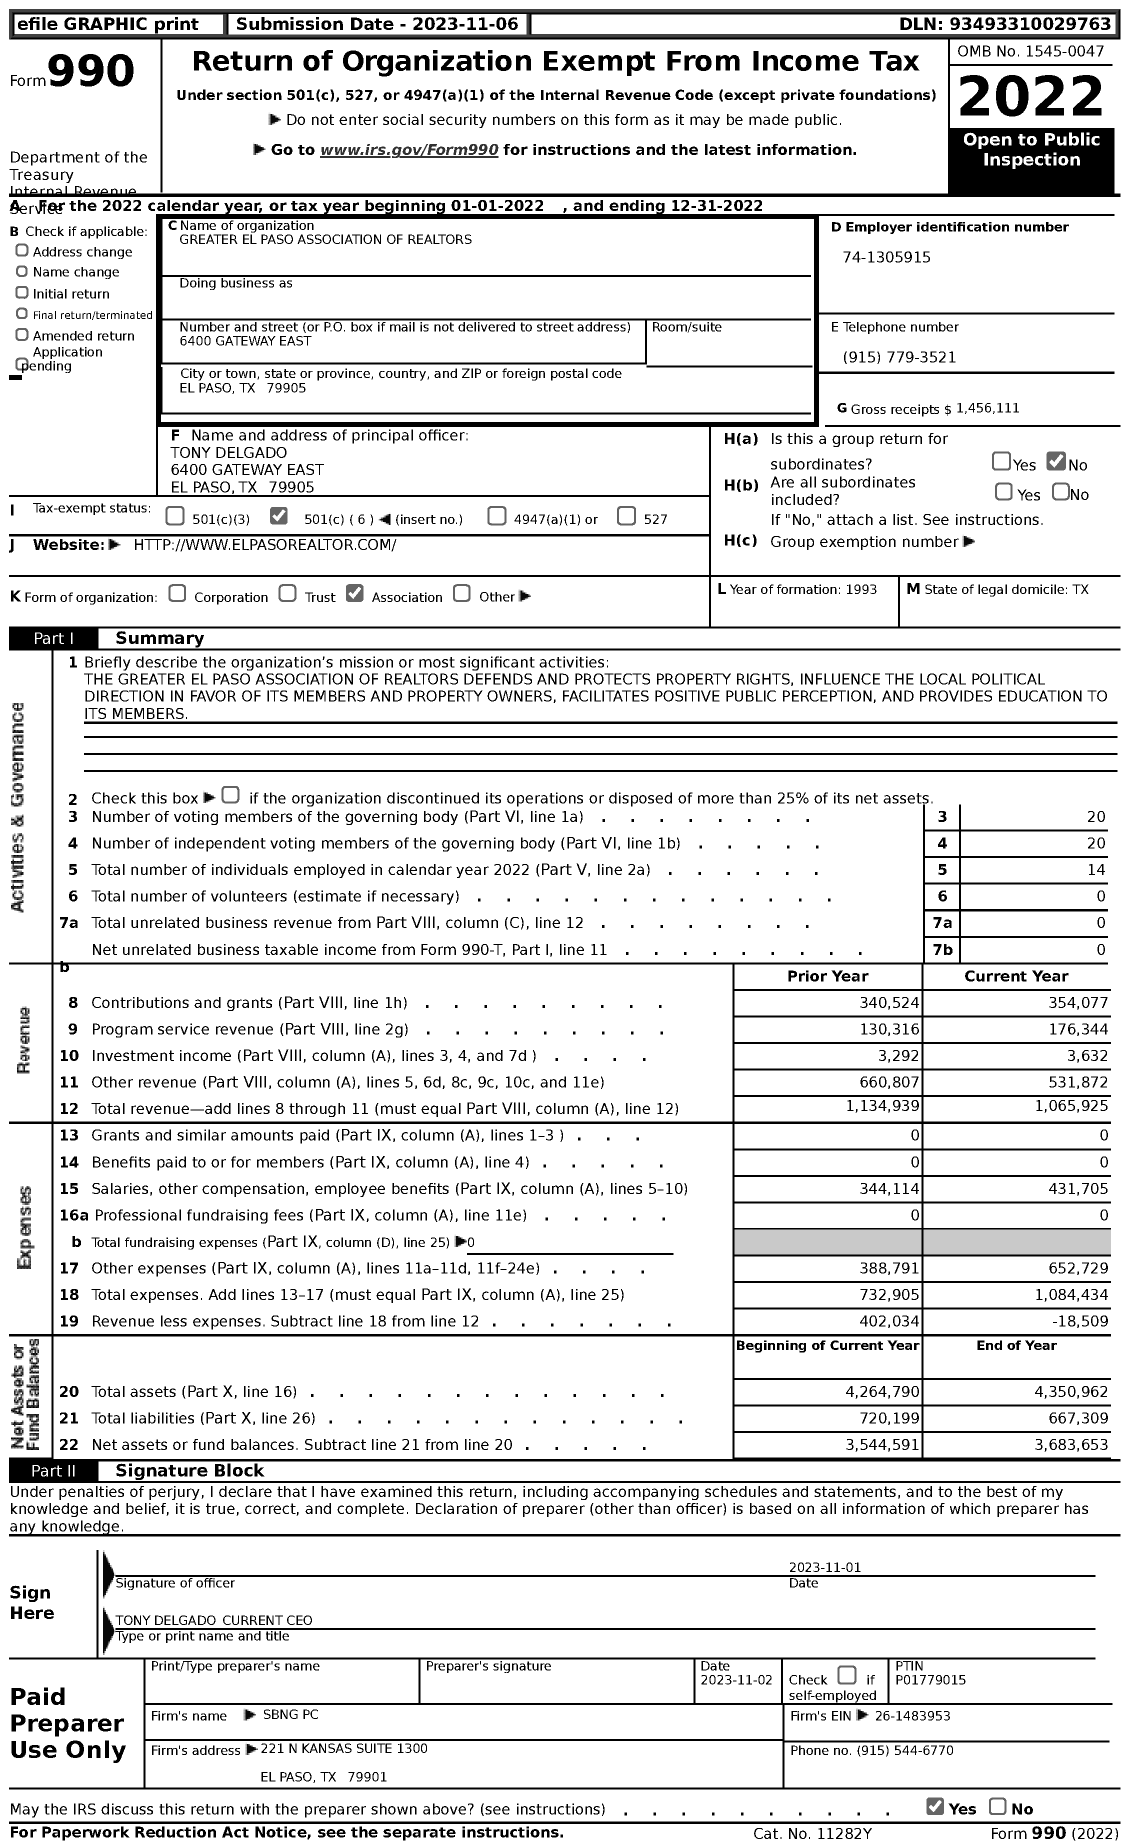 Image of first page of 2022 Form 990 for Greater El Paso Association of Realtors (GEPAR)